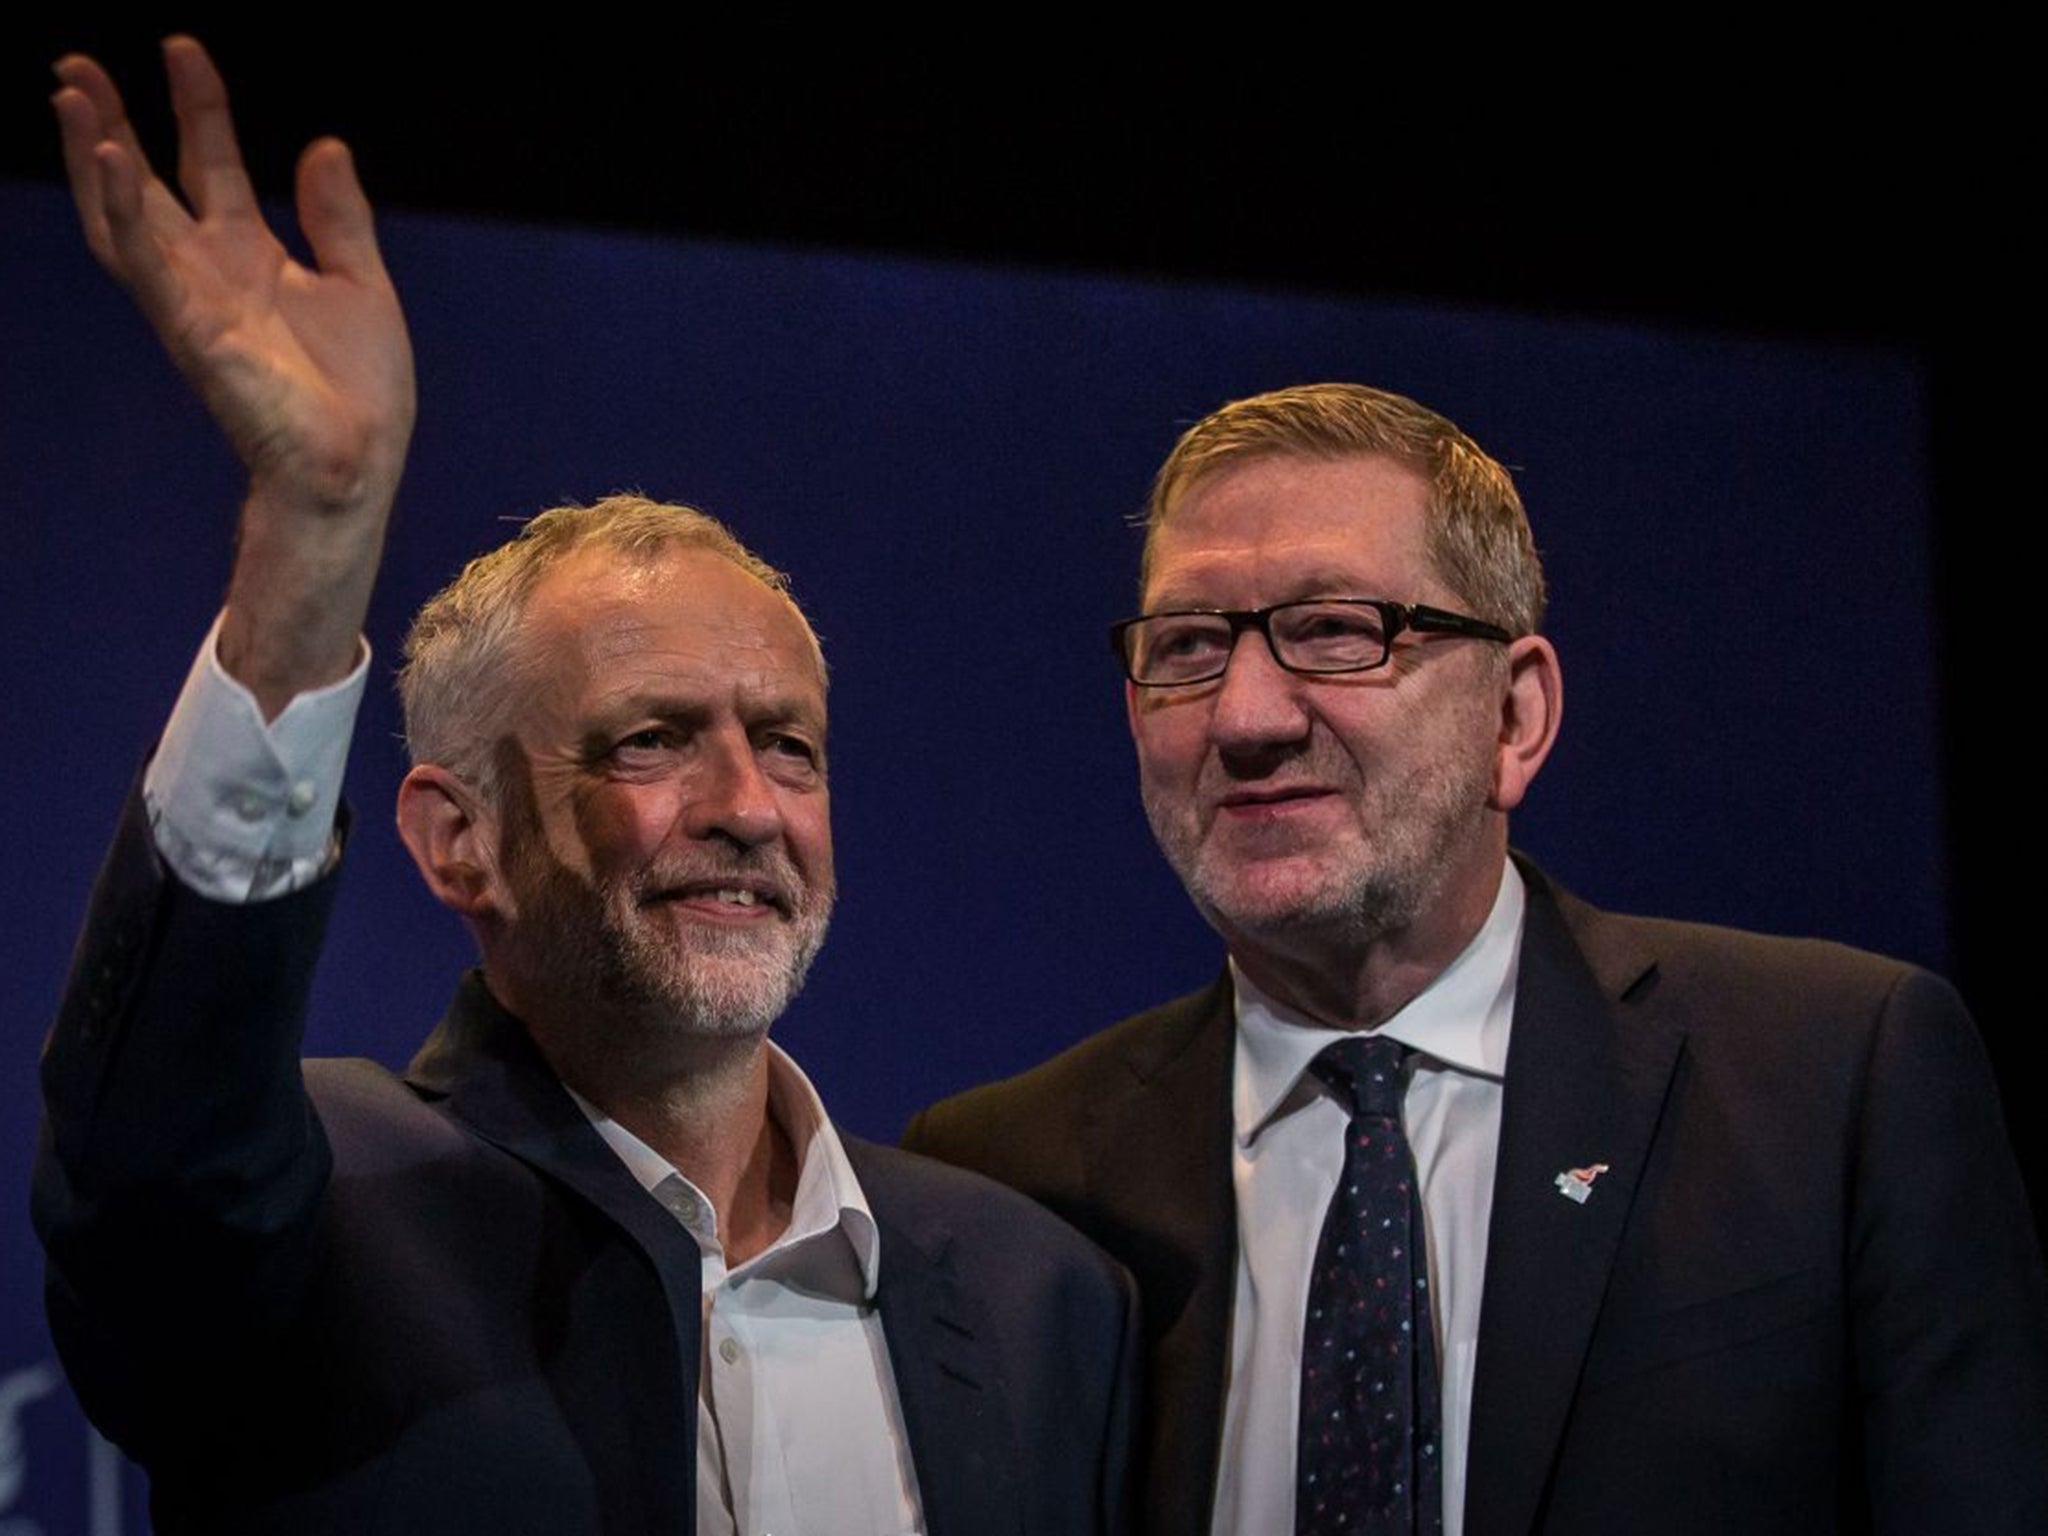 Corbyn and his supporters are not to blame for Labour's current state